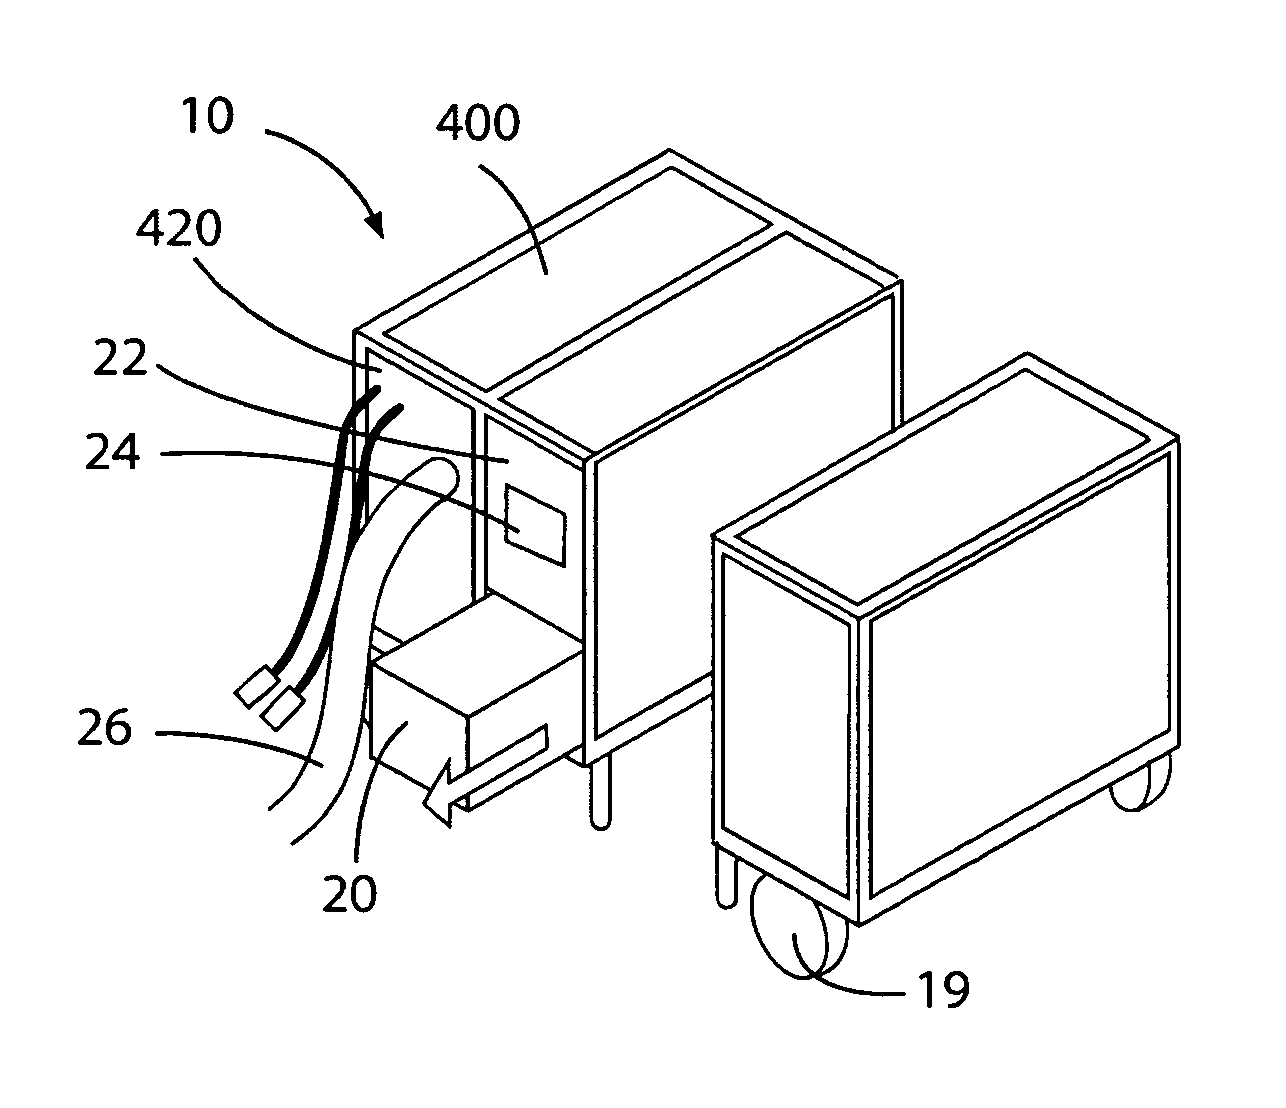 Adjustable air conditioning control system for a universal airplane ground support equipment cart